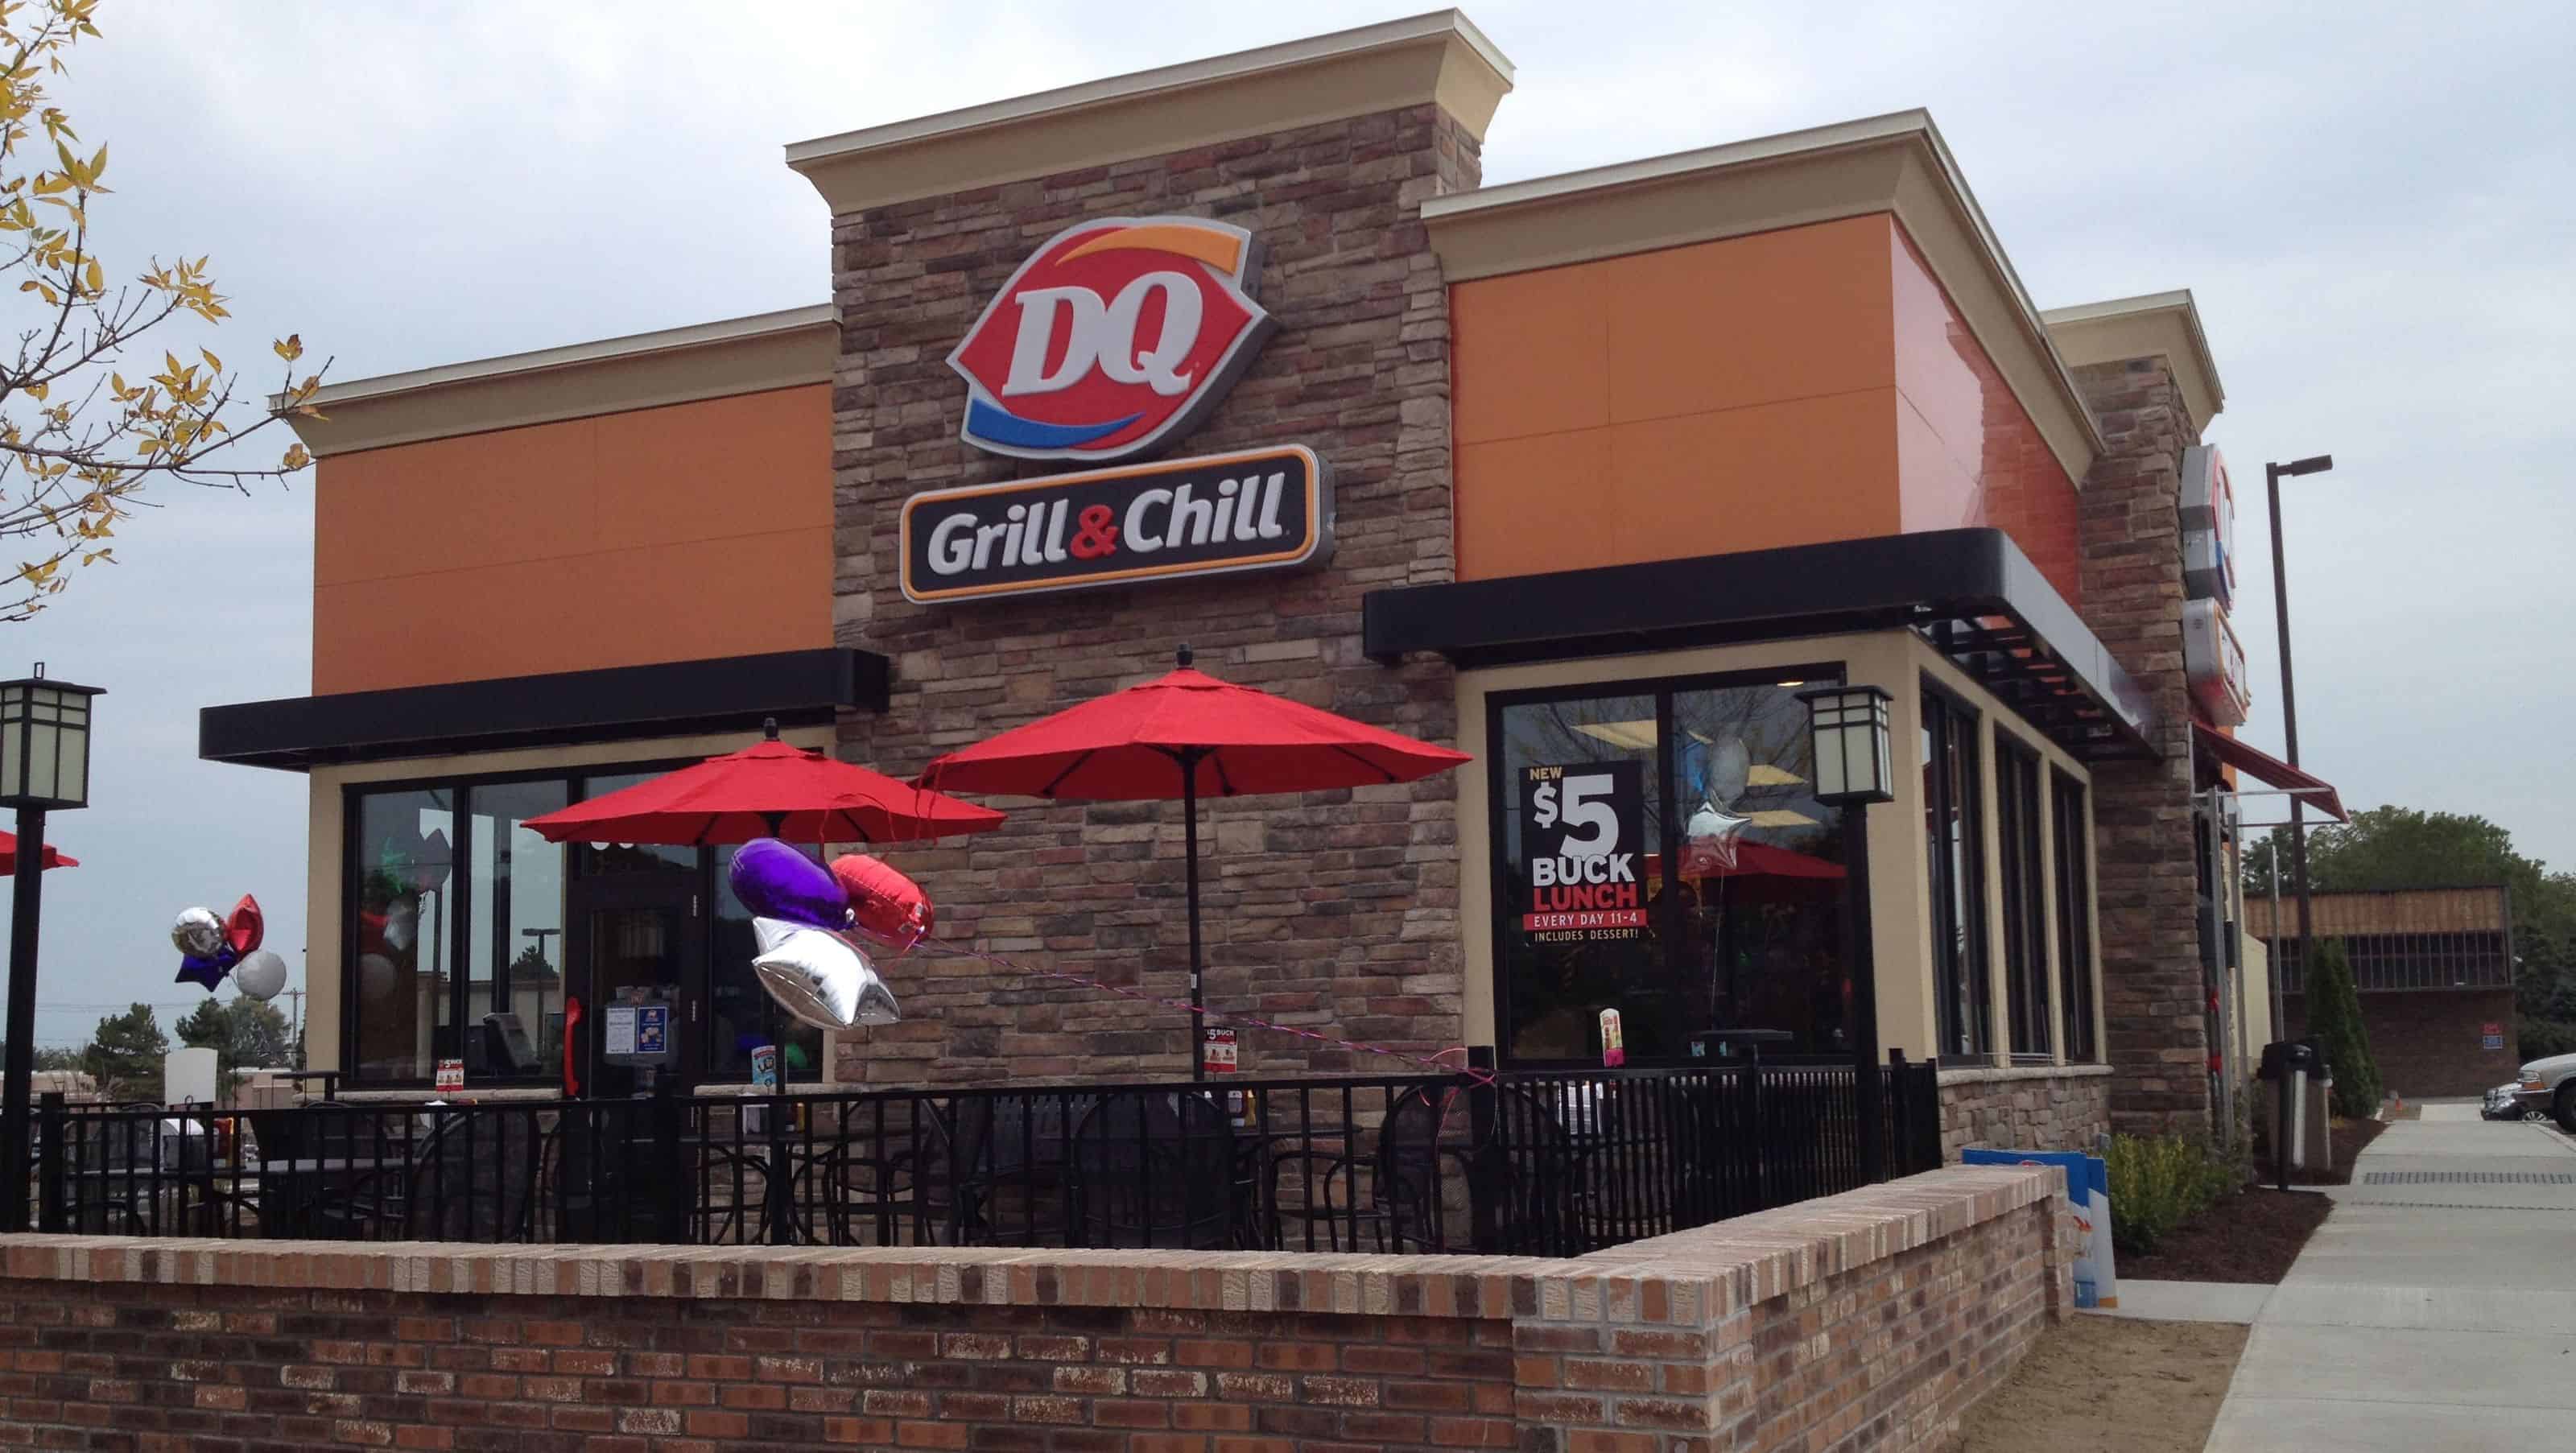 Dq grill & chill